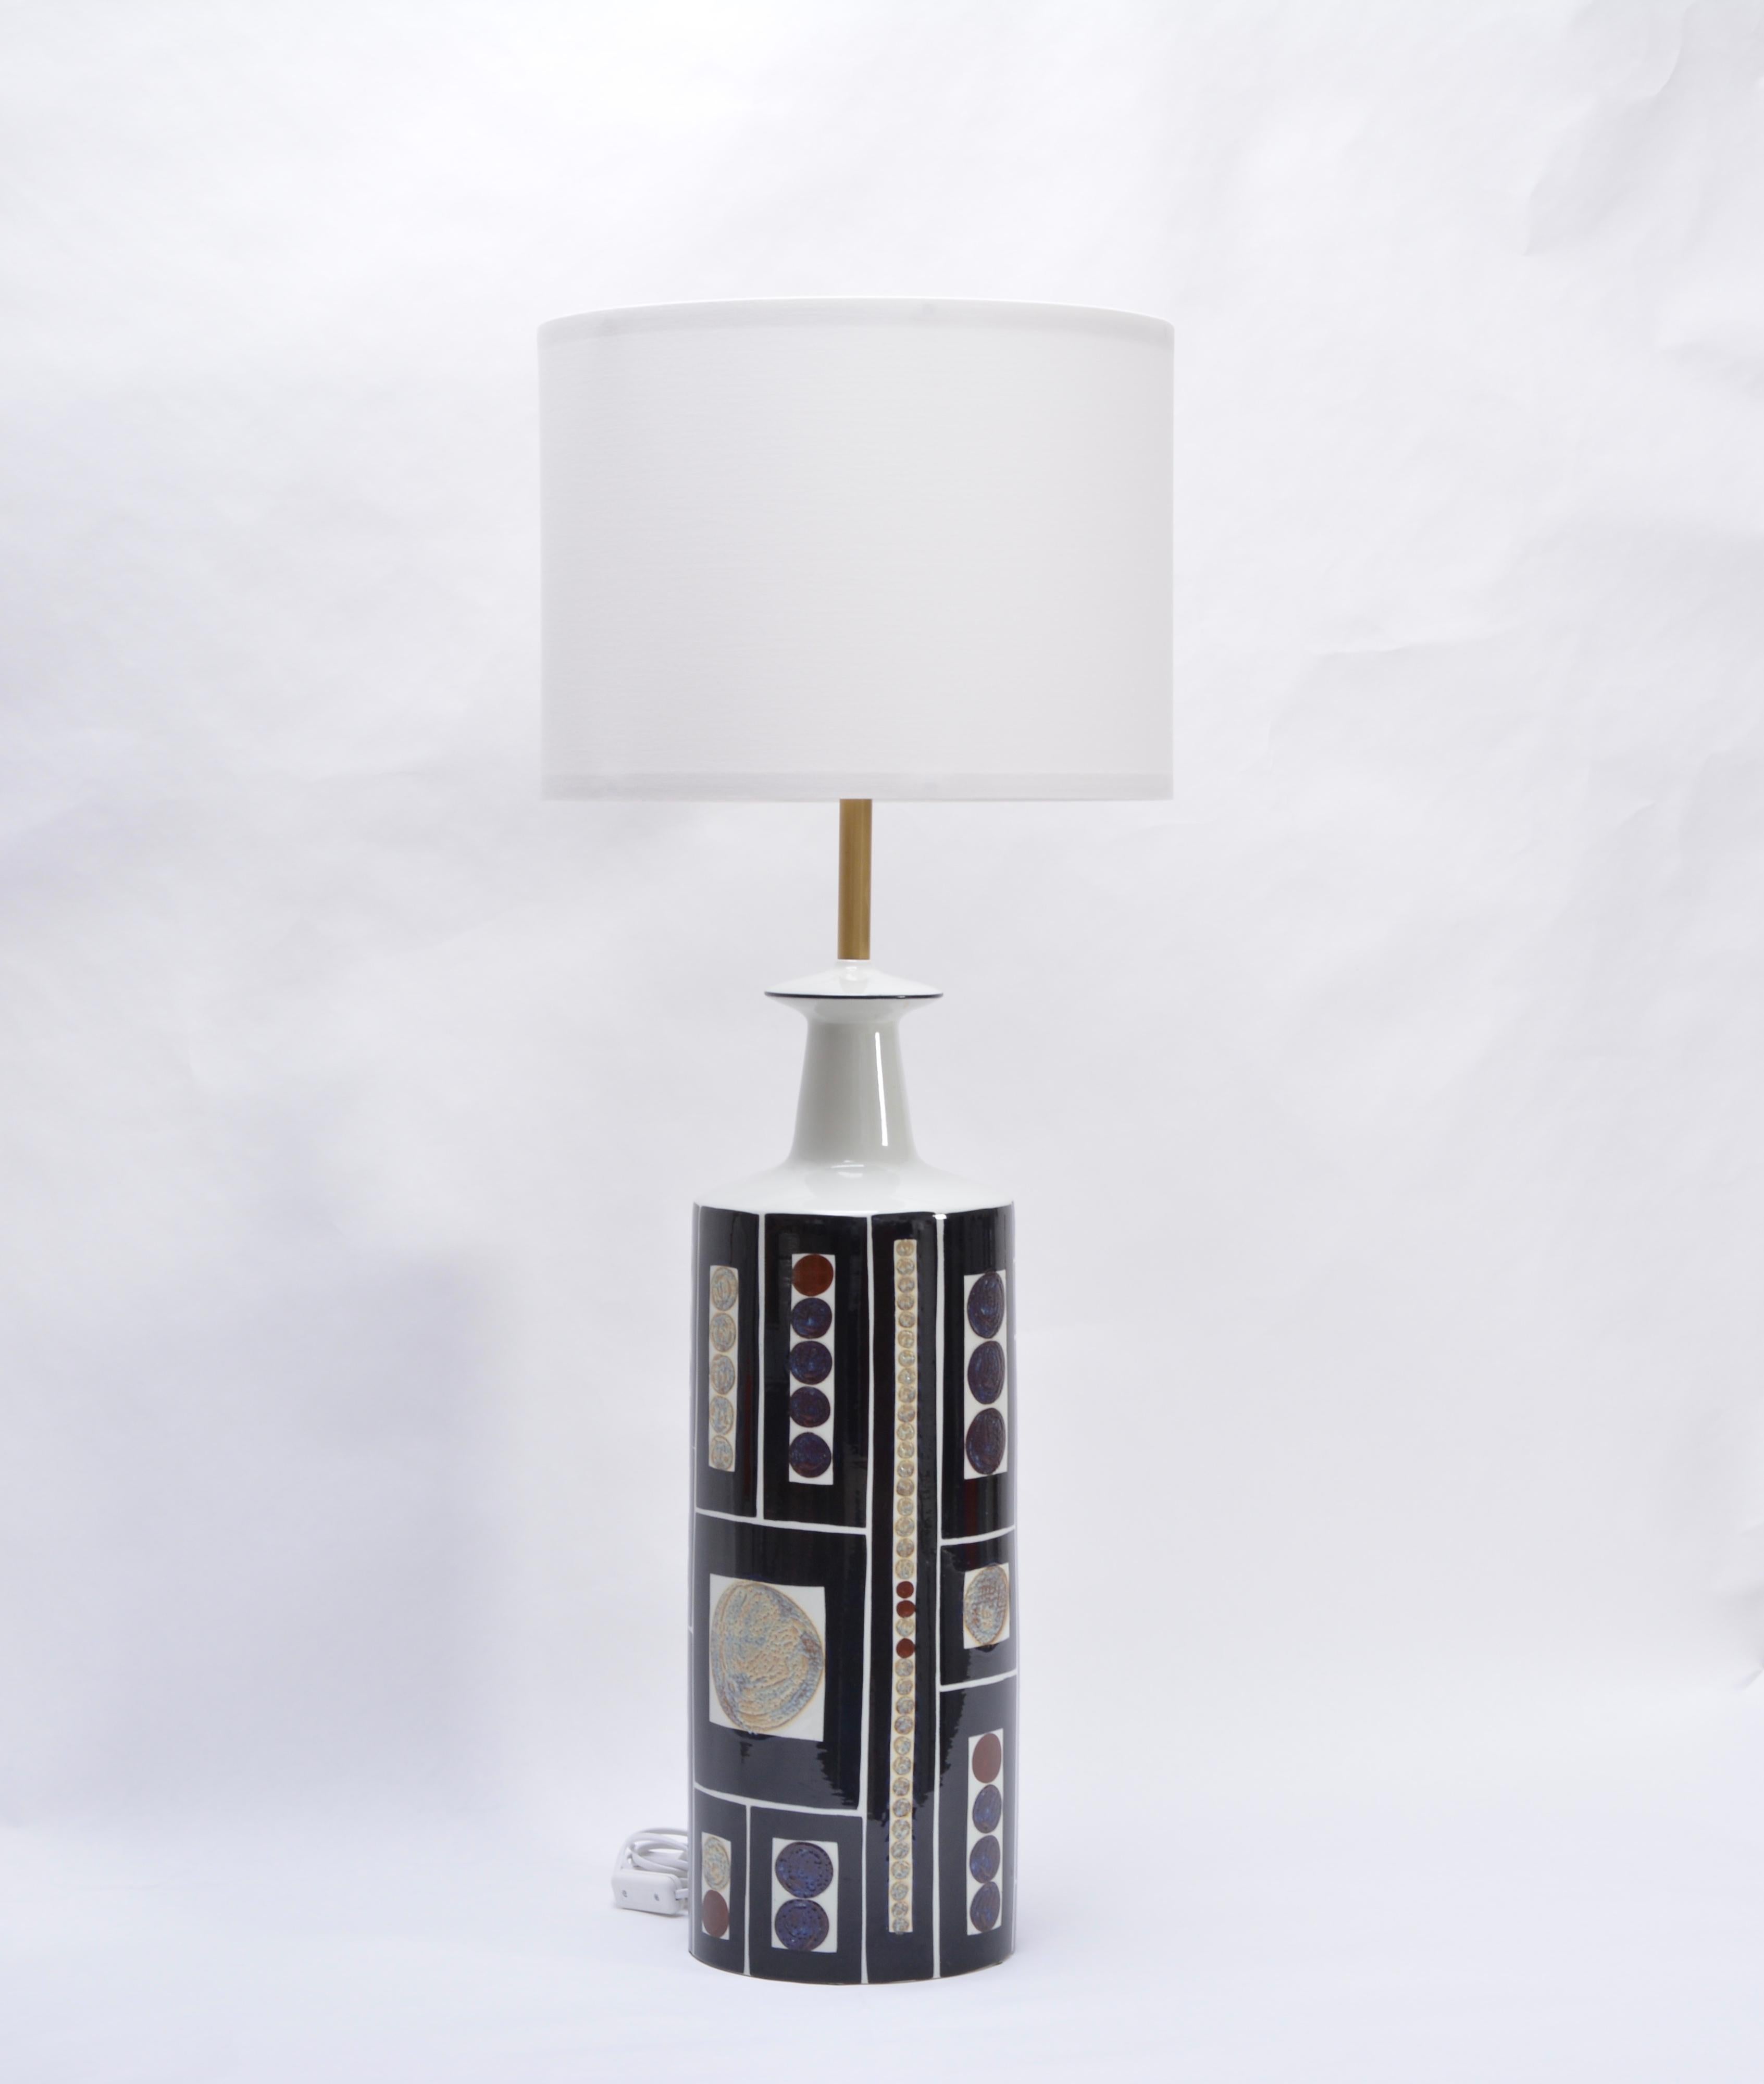 Very rare floor lamp with a wonderful graphic and bold design by Danish artist Ingelise Kofoed. The lamp was produced by Aluminia/Royal Copenhagen in collaboration with Danish lamp manufacturer Fog & Mørup. Ingelise Kofoed designed the Royal and